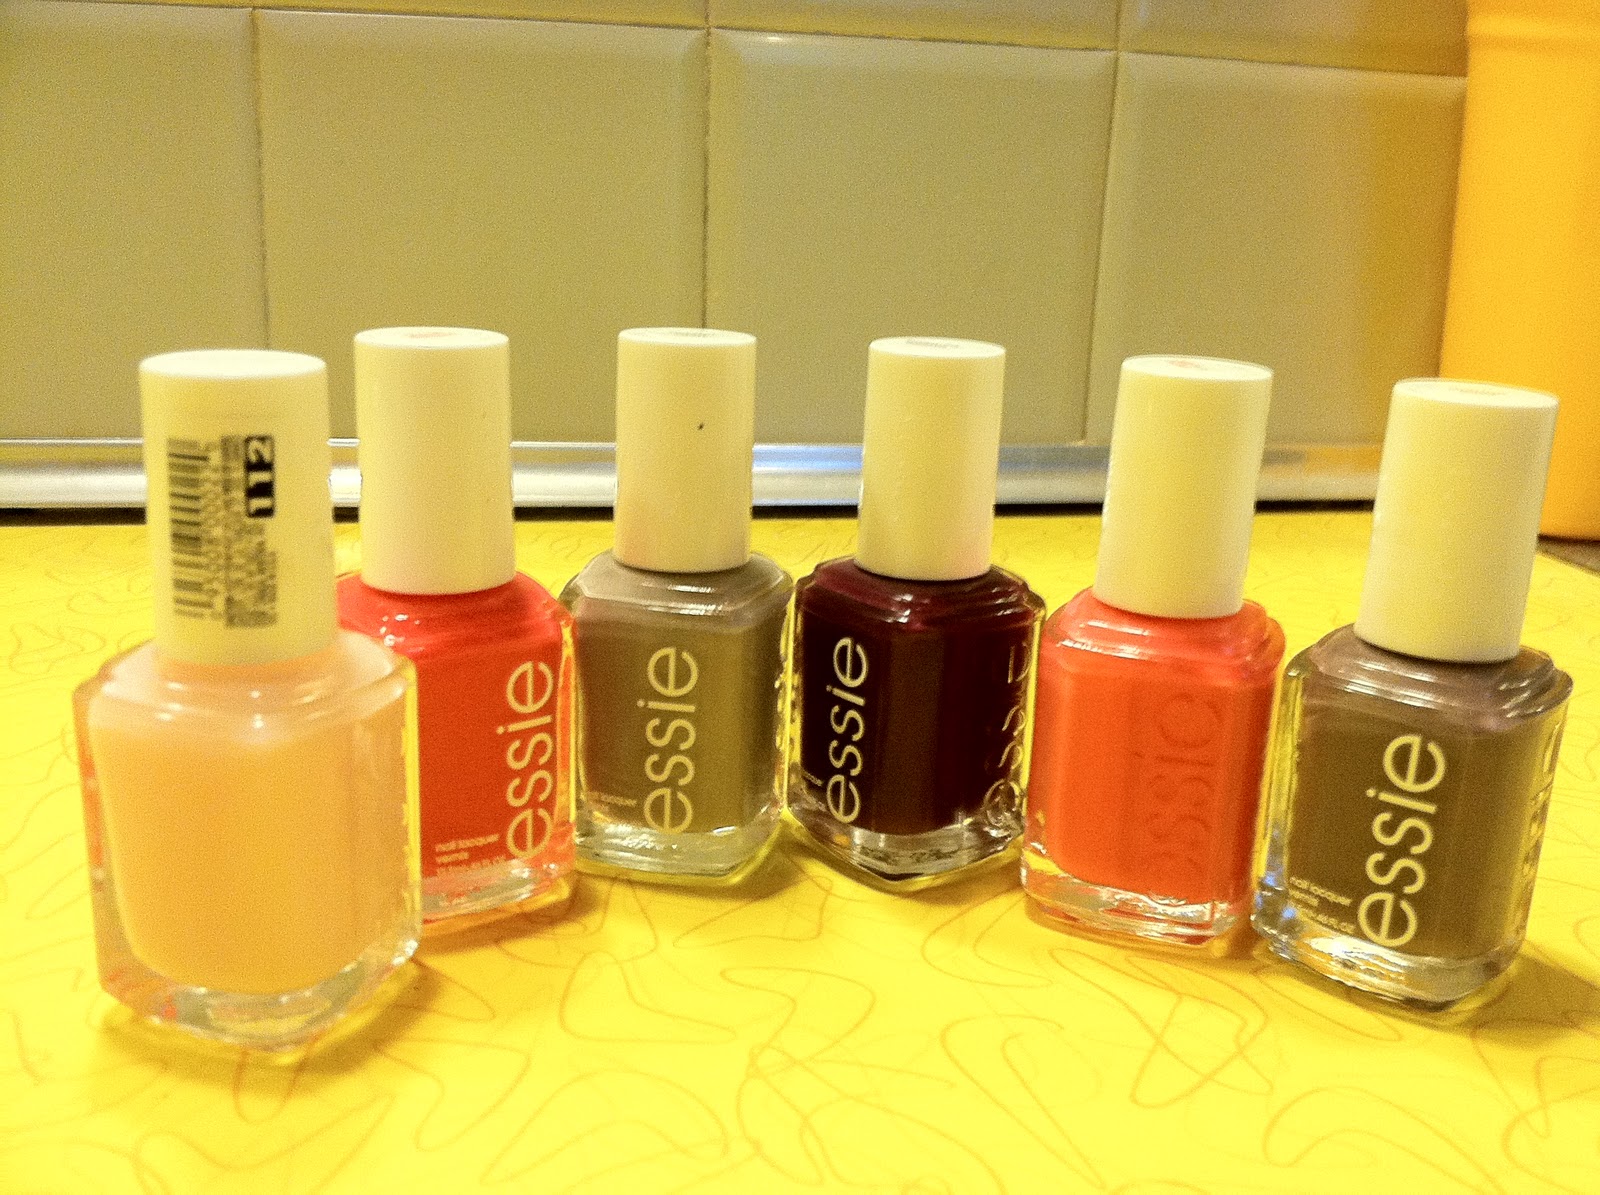 Essie Nail Polish in "Palm Springs" - wide 10